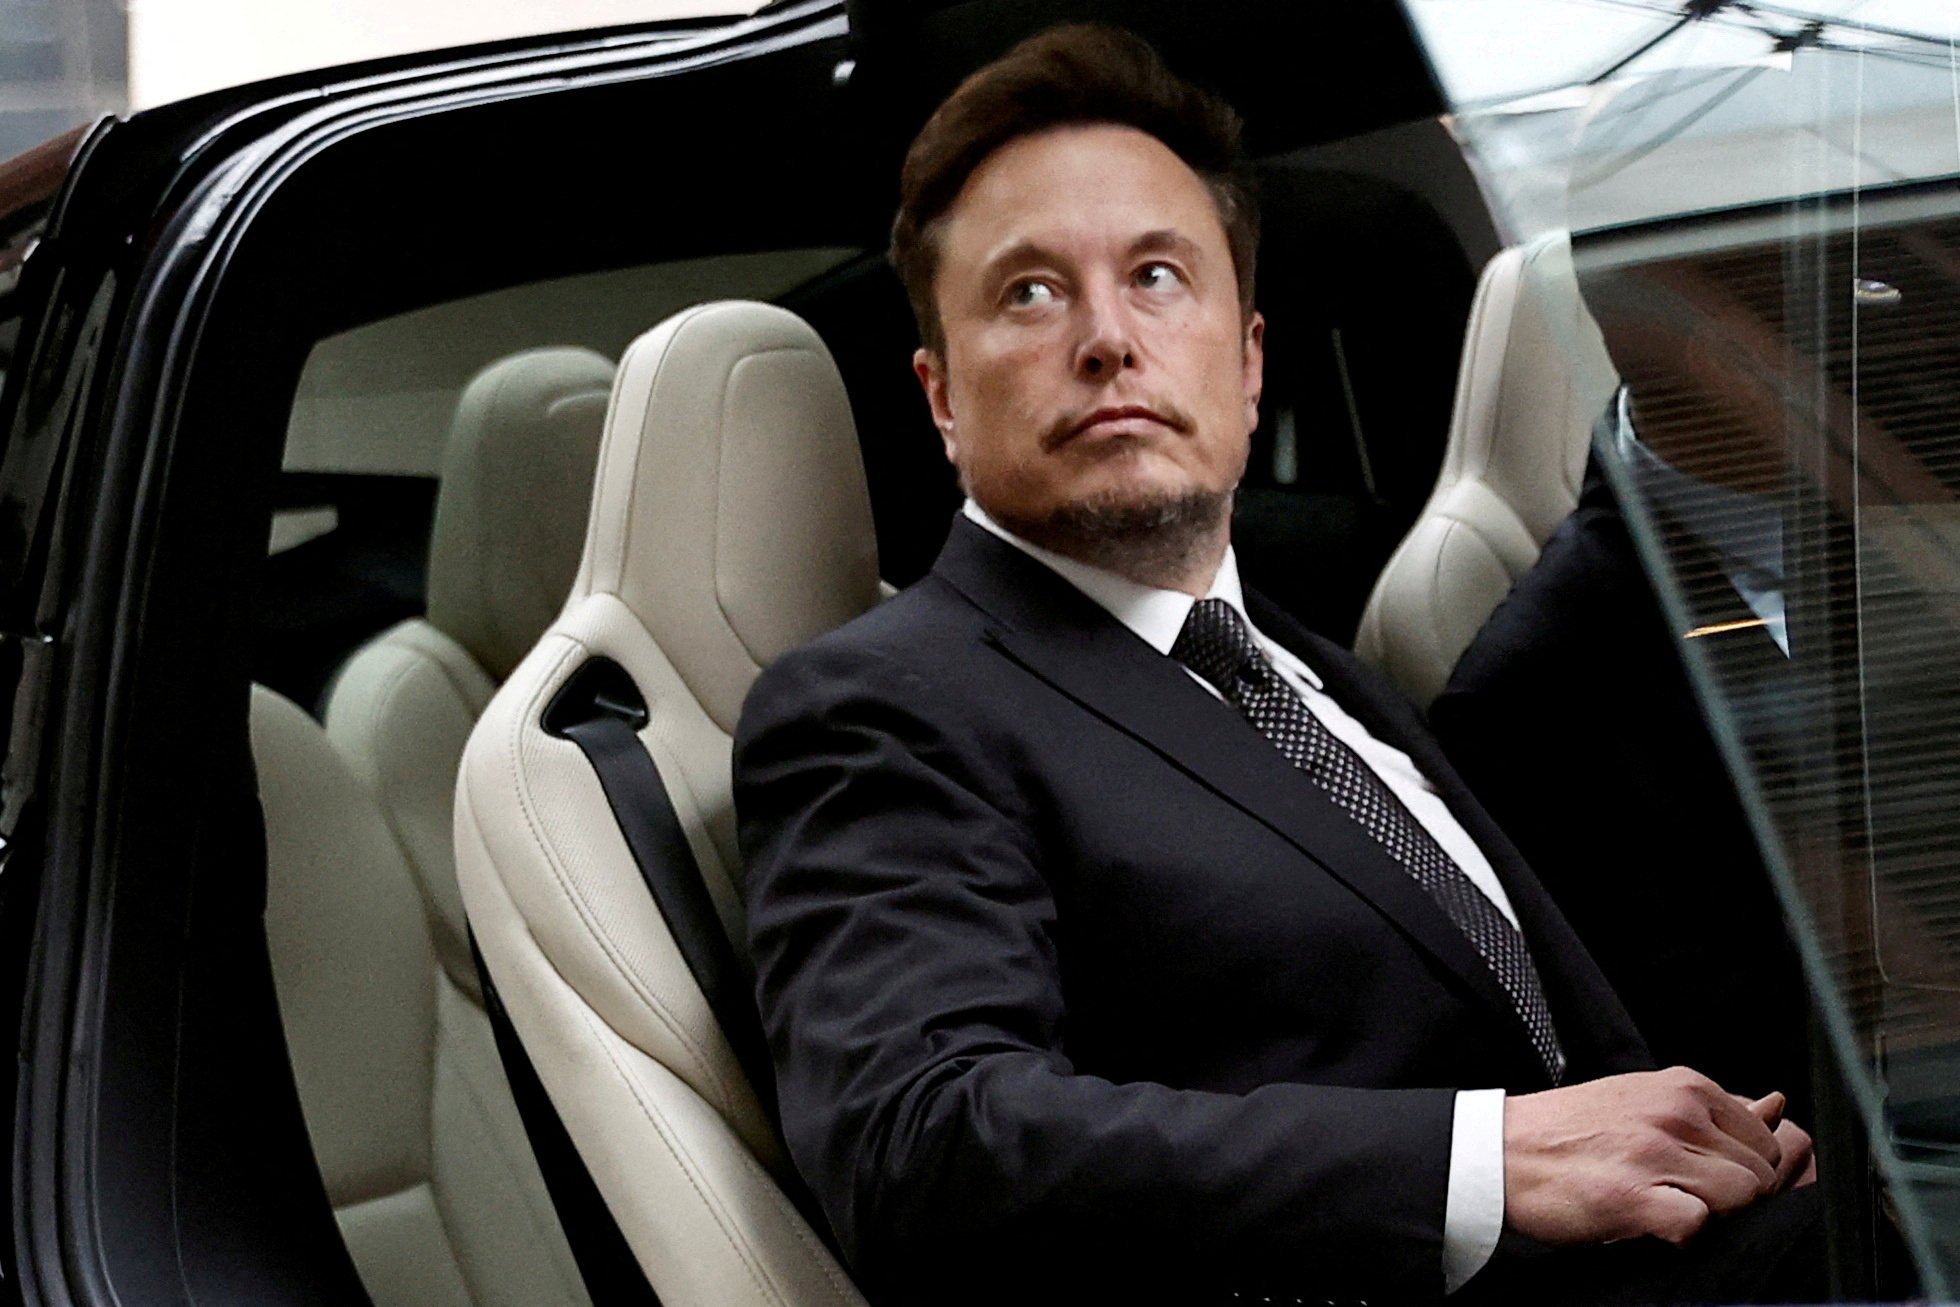 Tesla CEO Elon Musk emerges from one of his company’s electric vehicles outside a hotel in Beijing, China in May 2023. Photo: Reuters